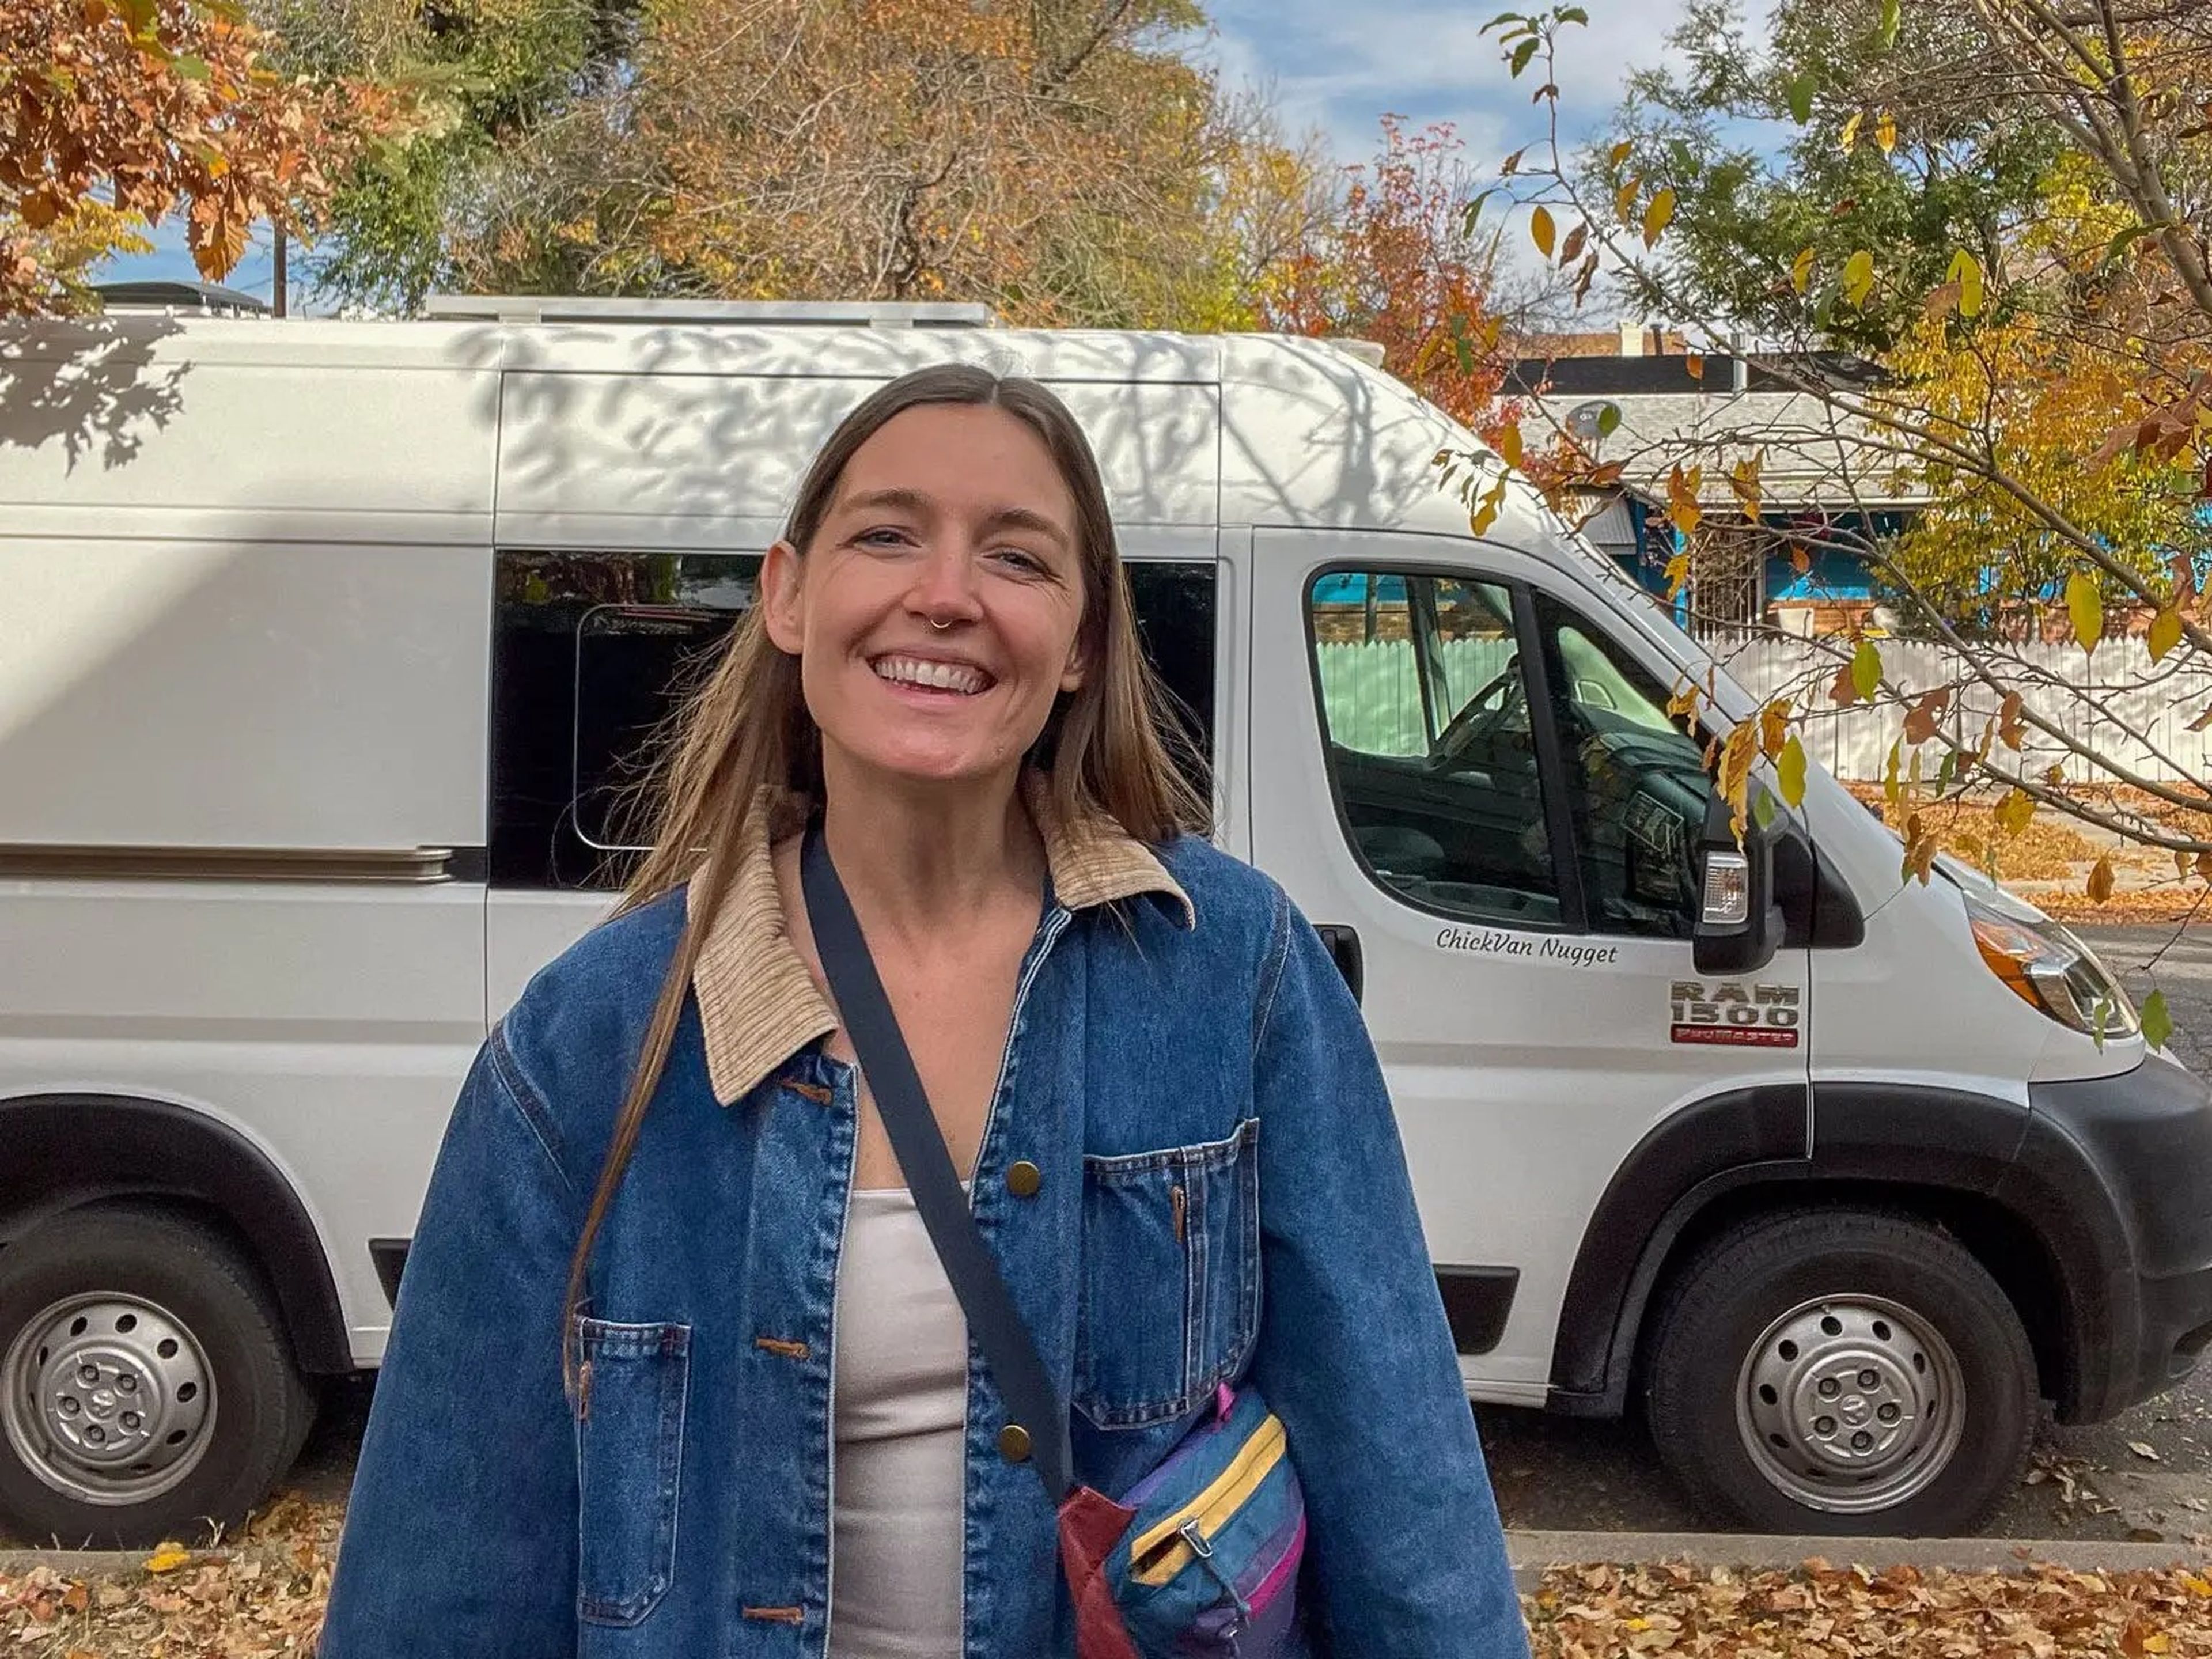 The author outside her rental campervan.